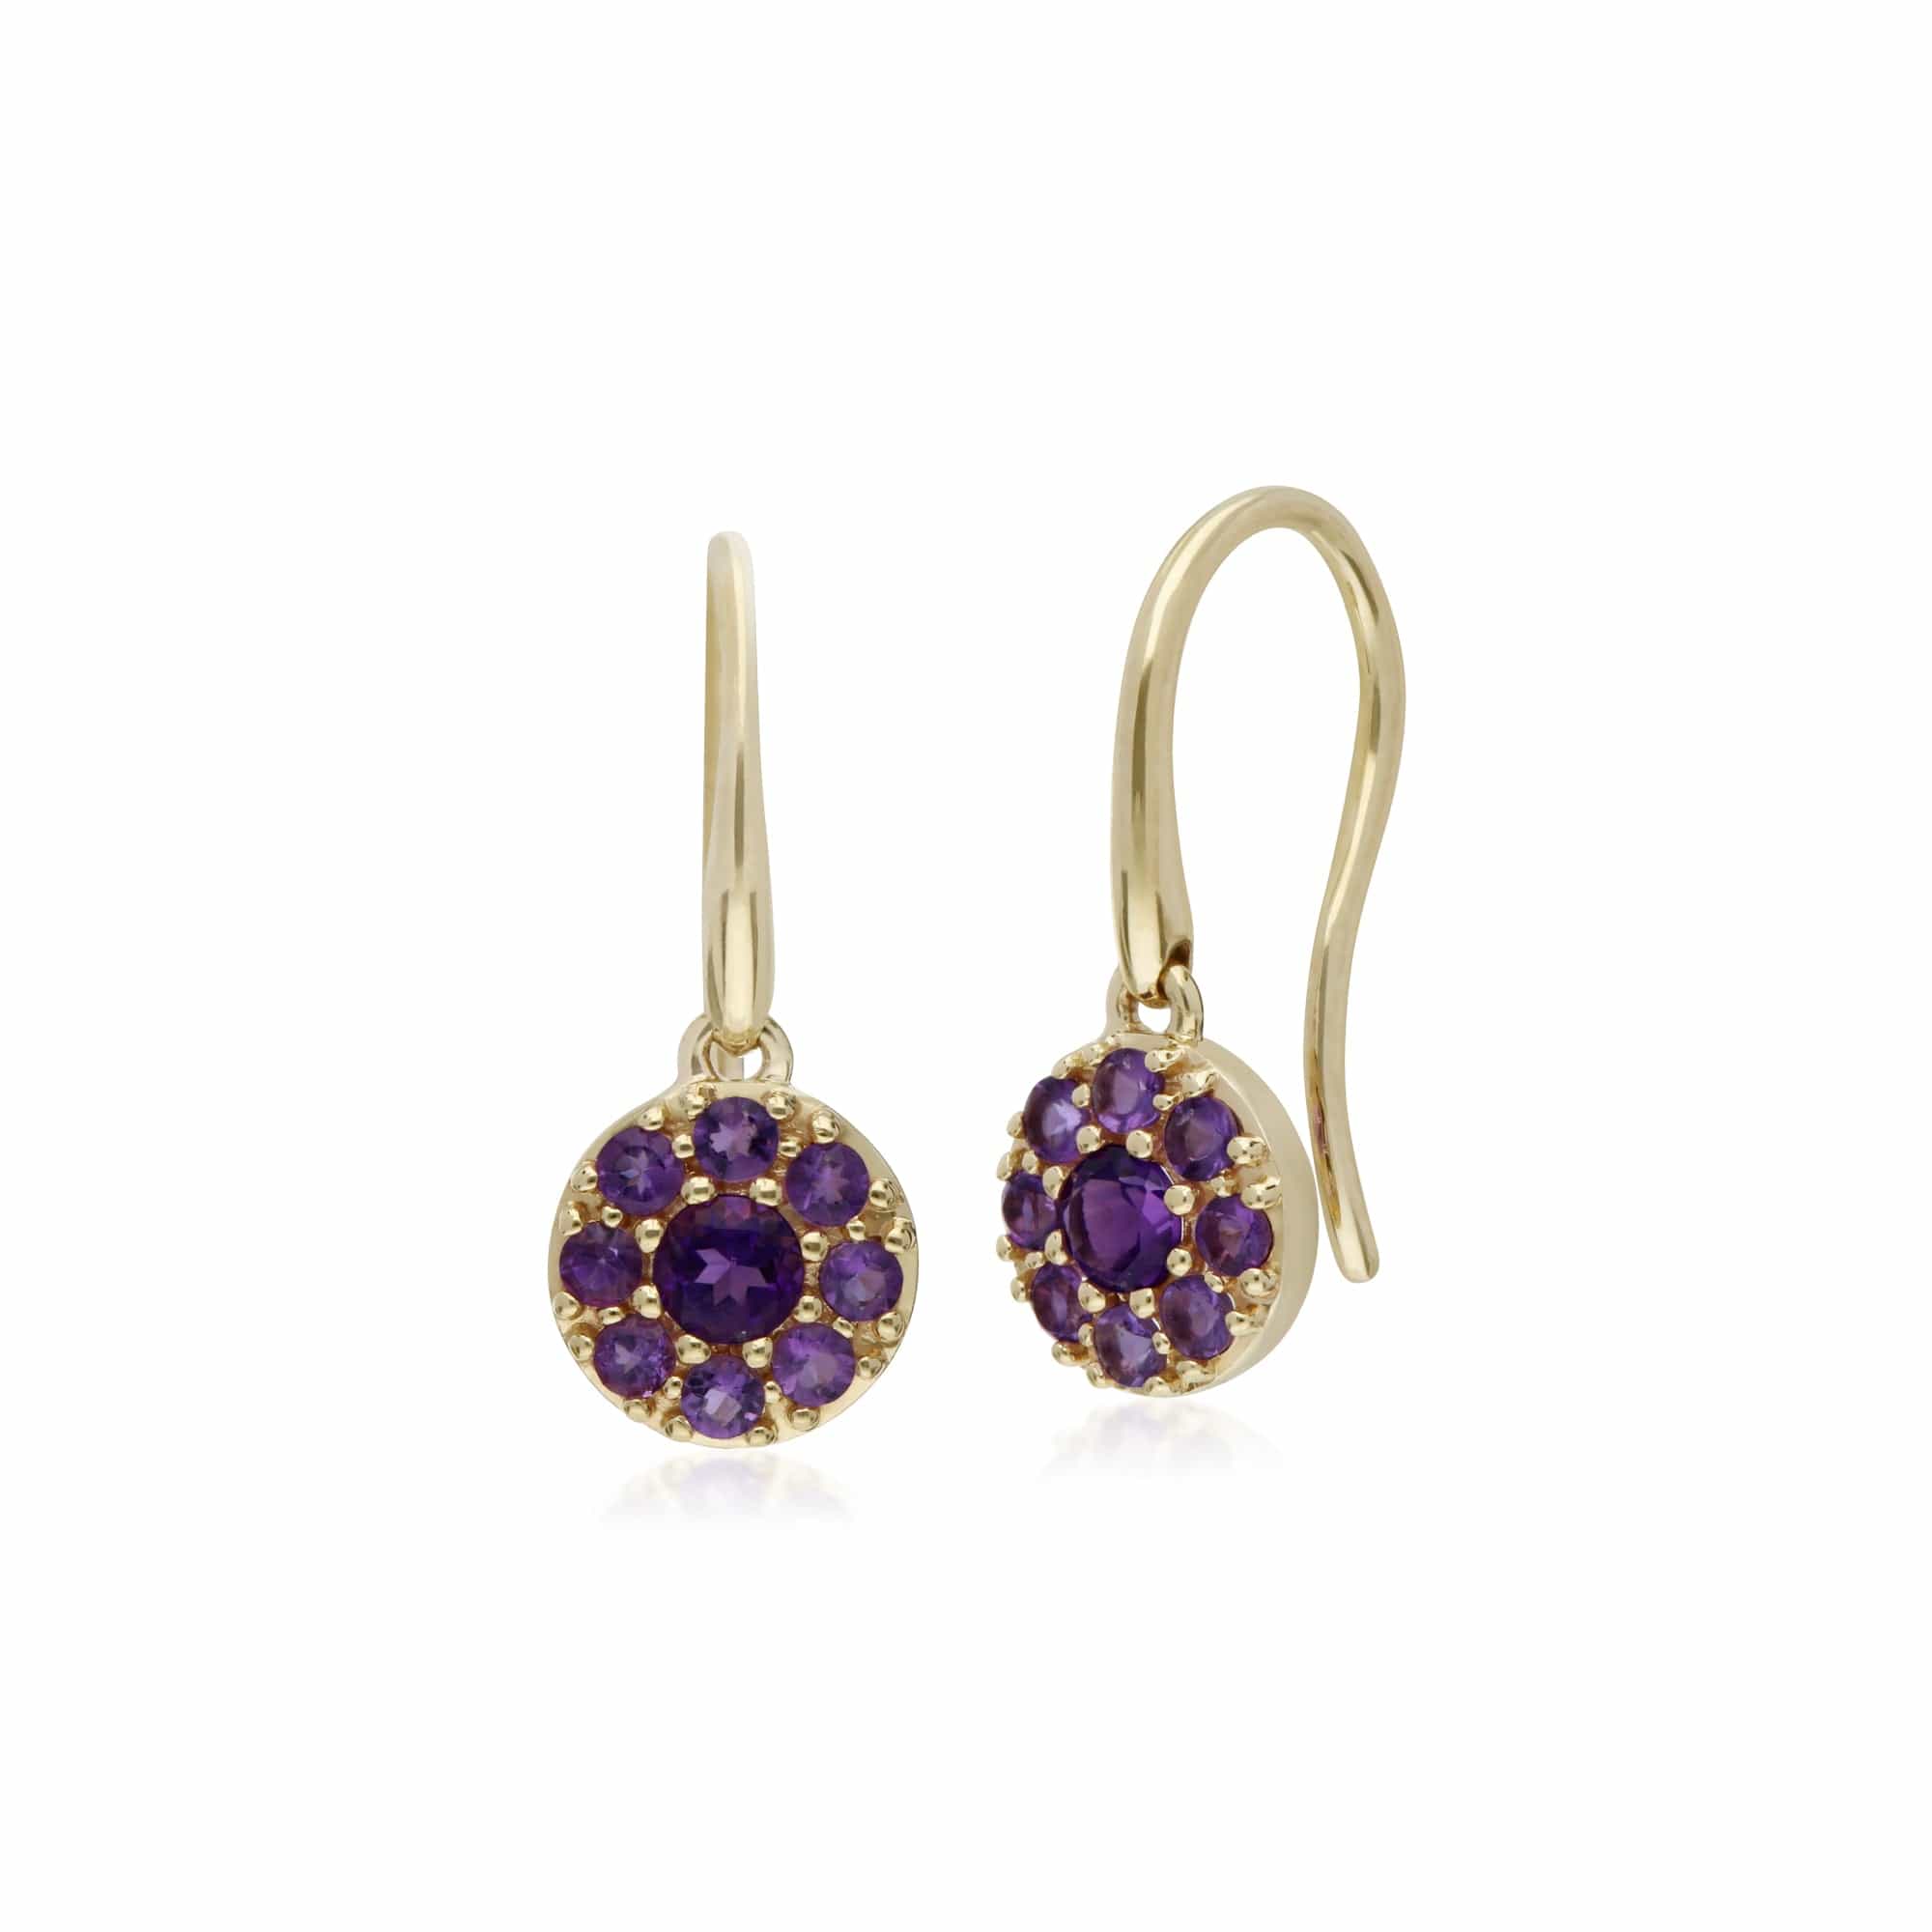 135E1573049-135P1910049 Classic Round Amethyst Cluster Drop Earrings & Pendant Set in 9ct Yellow Gold 2